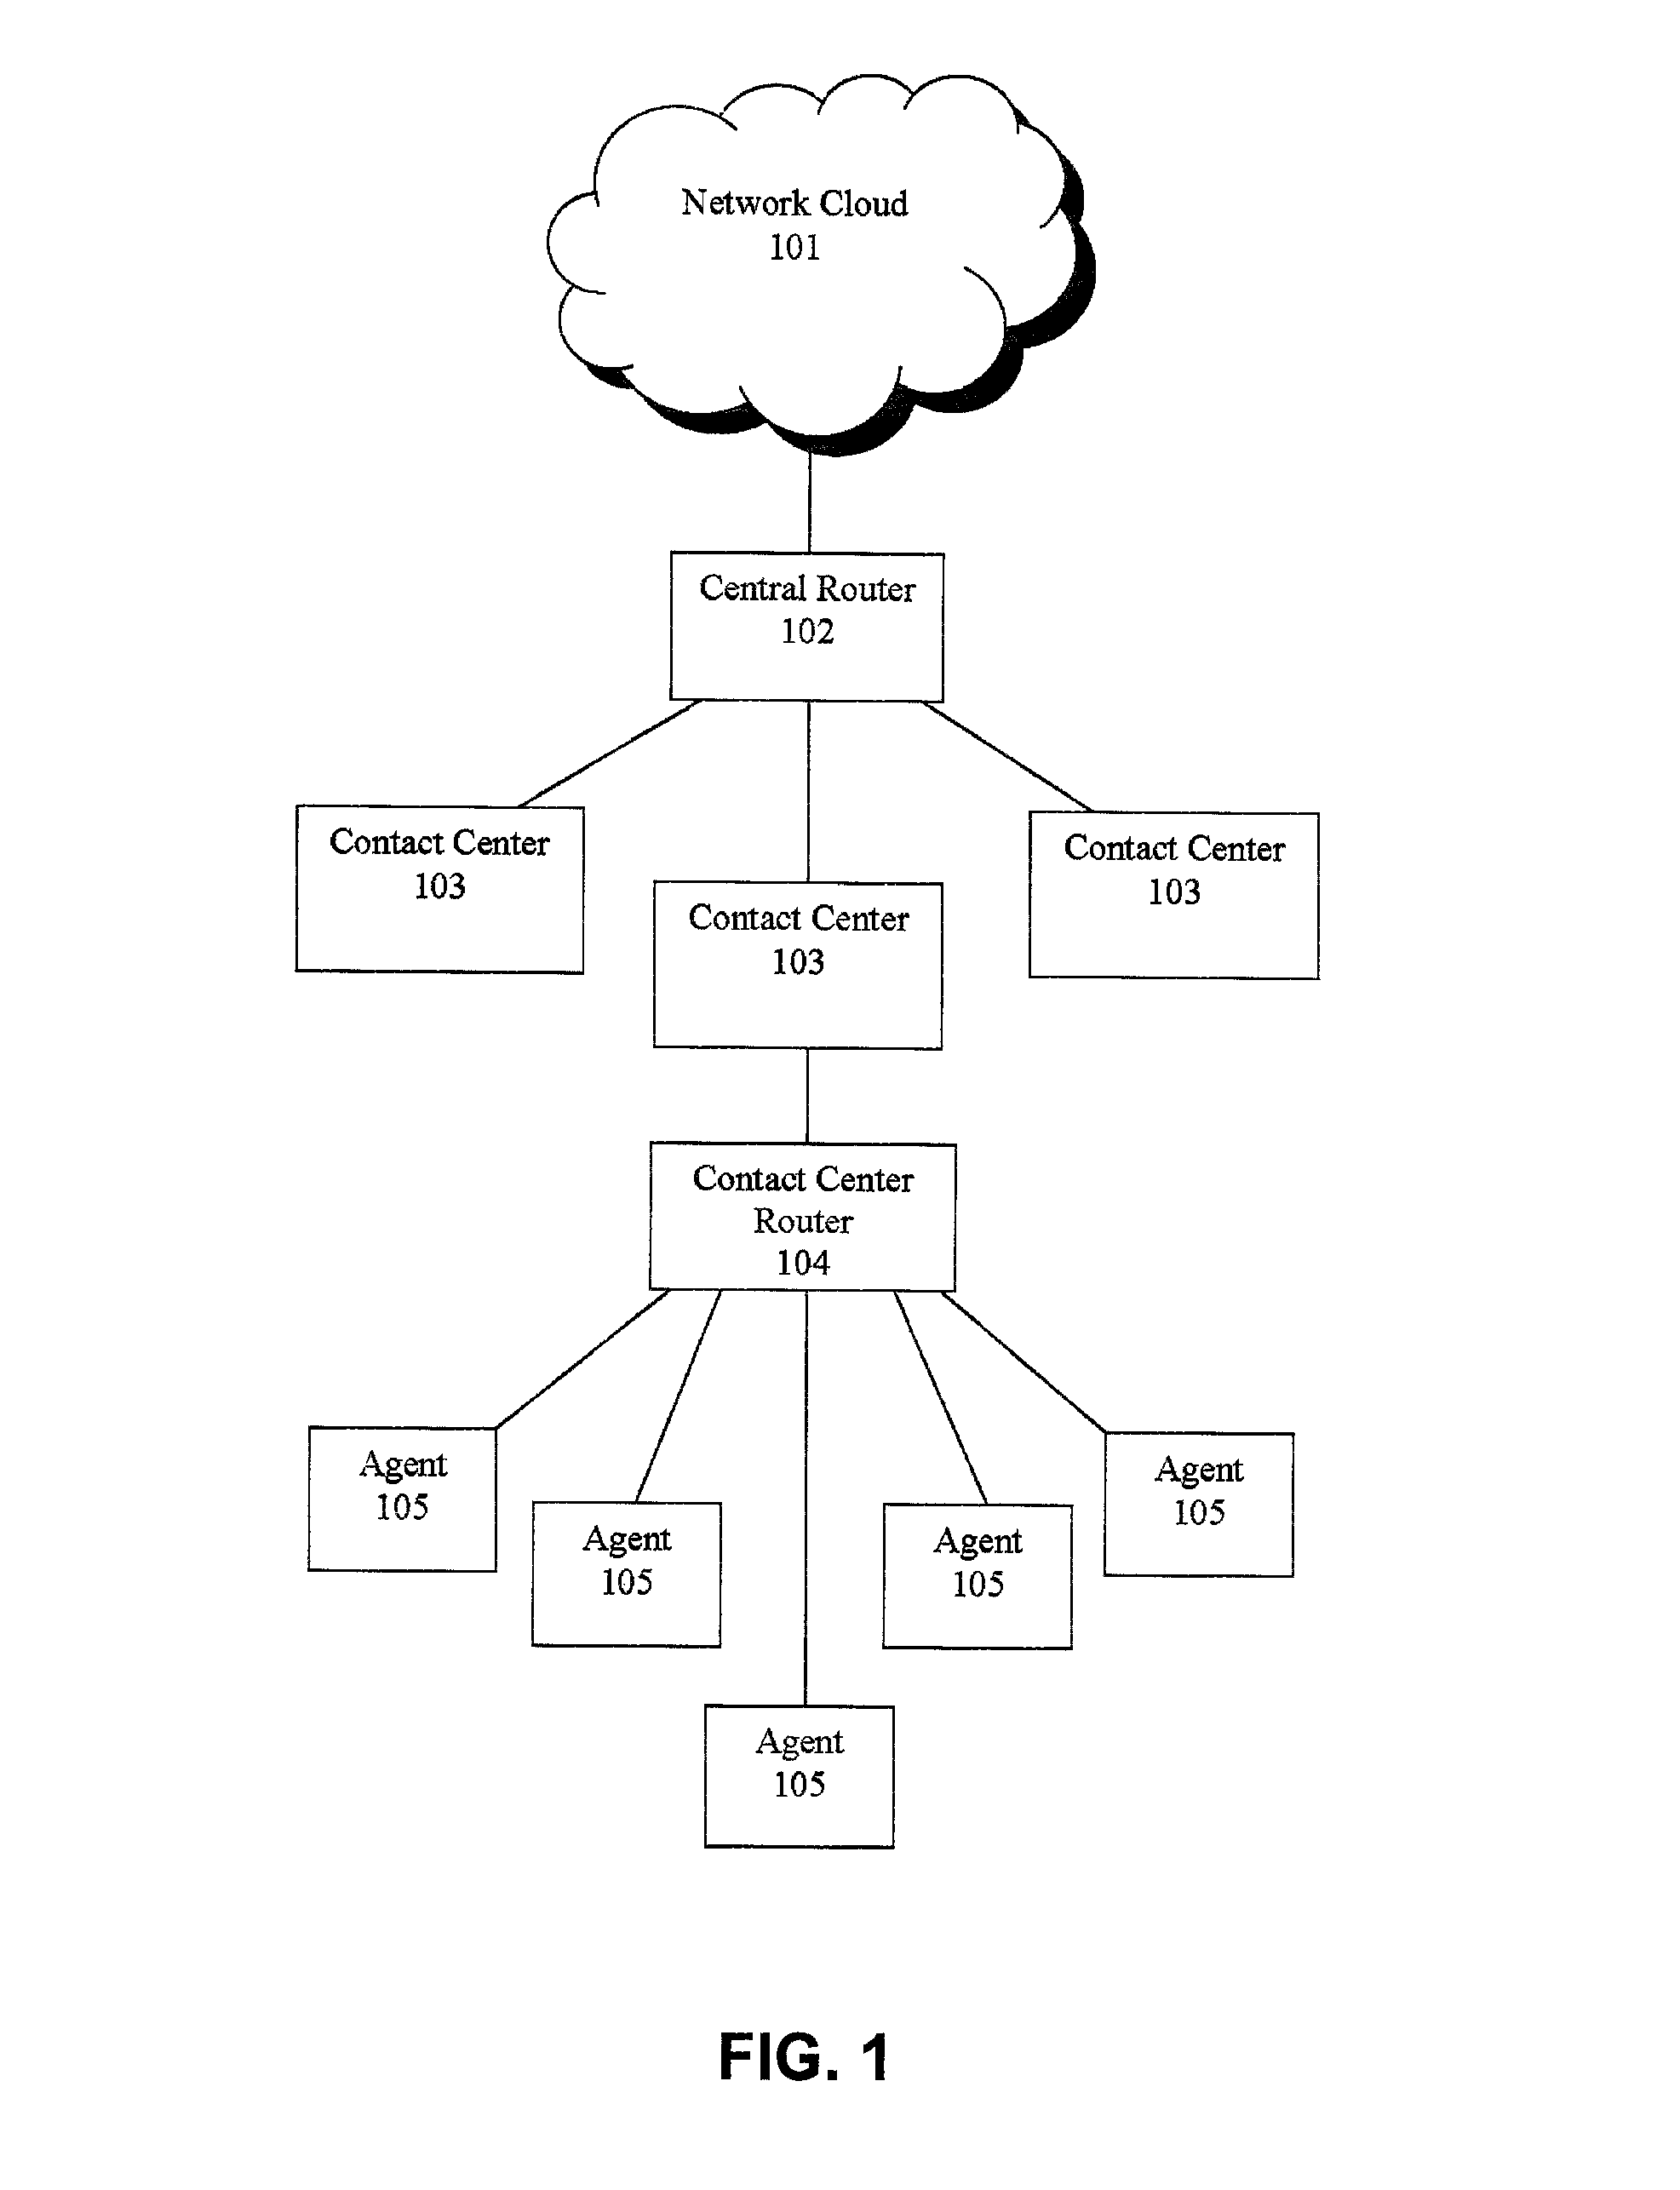 Agent satisfaction data for call routing based on pattern matching algorithm